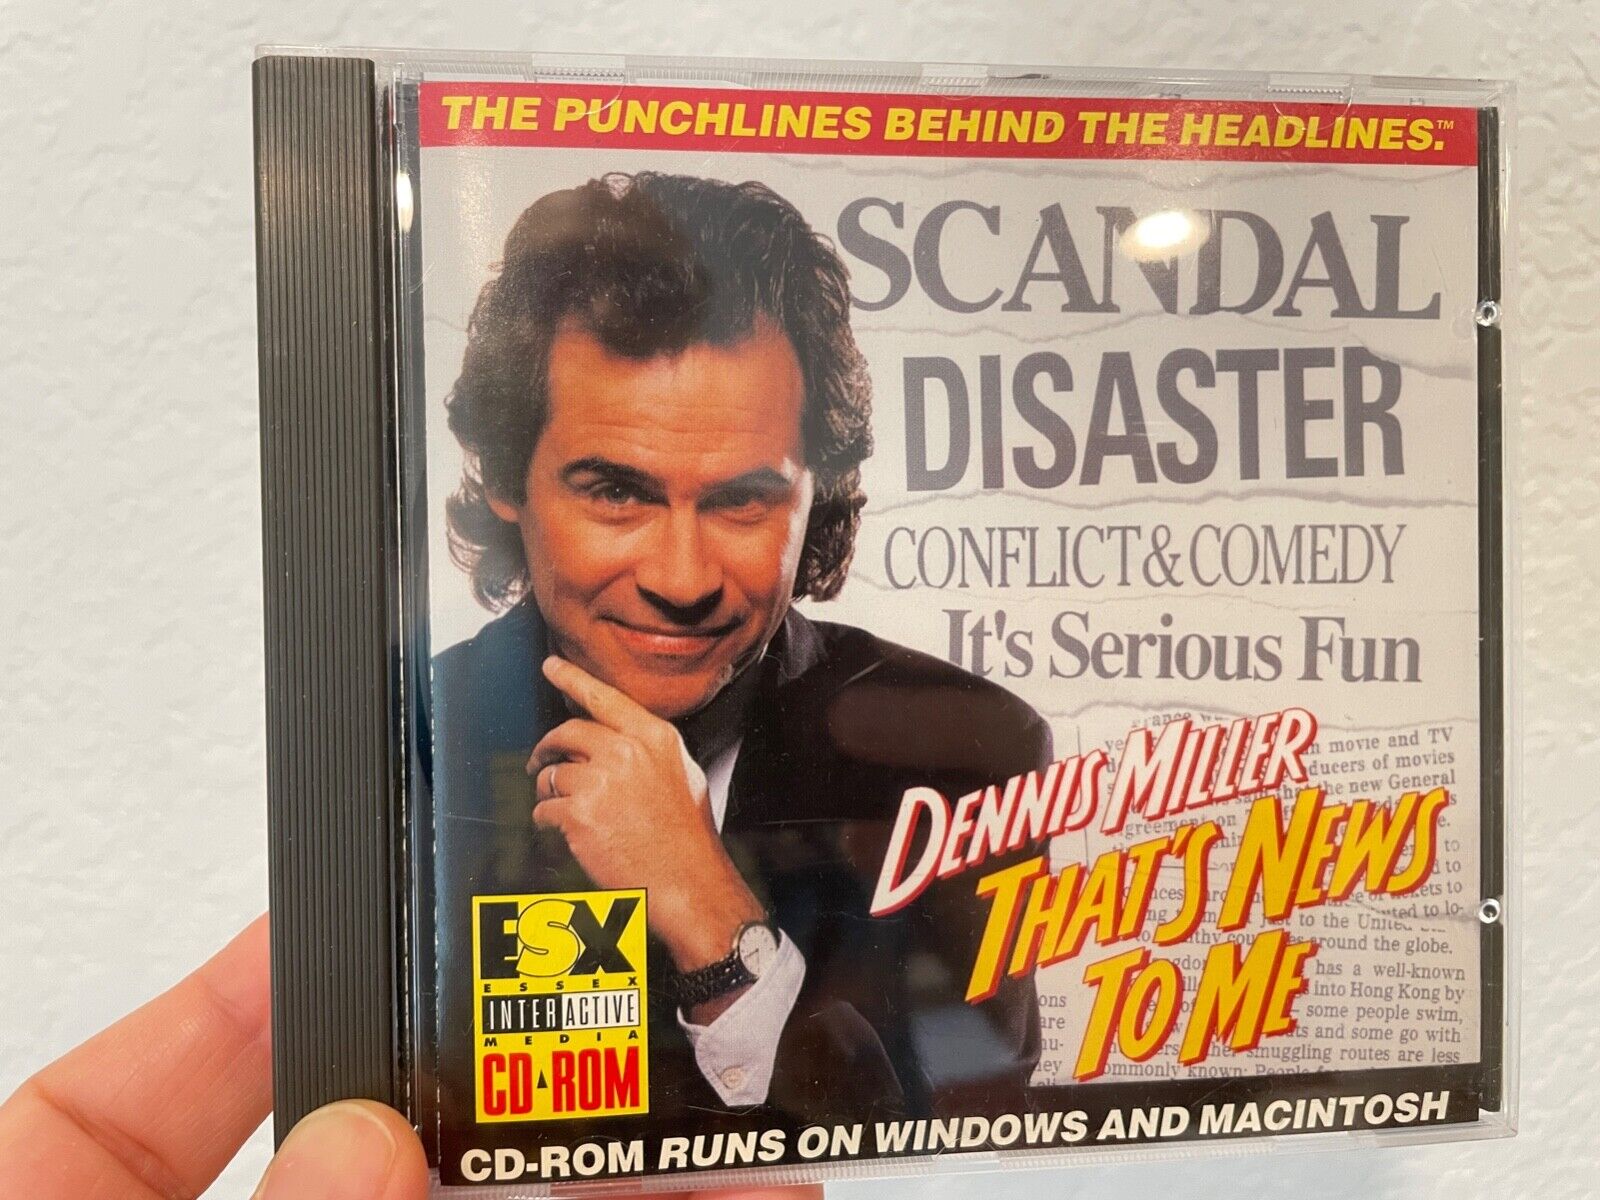 Dennis Miller: That's News to Me (CD ROM) MINT extremely RARE/OOP 